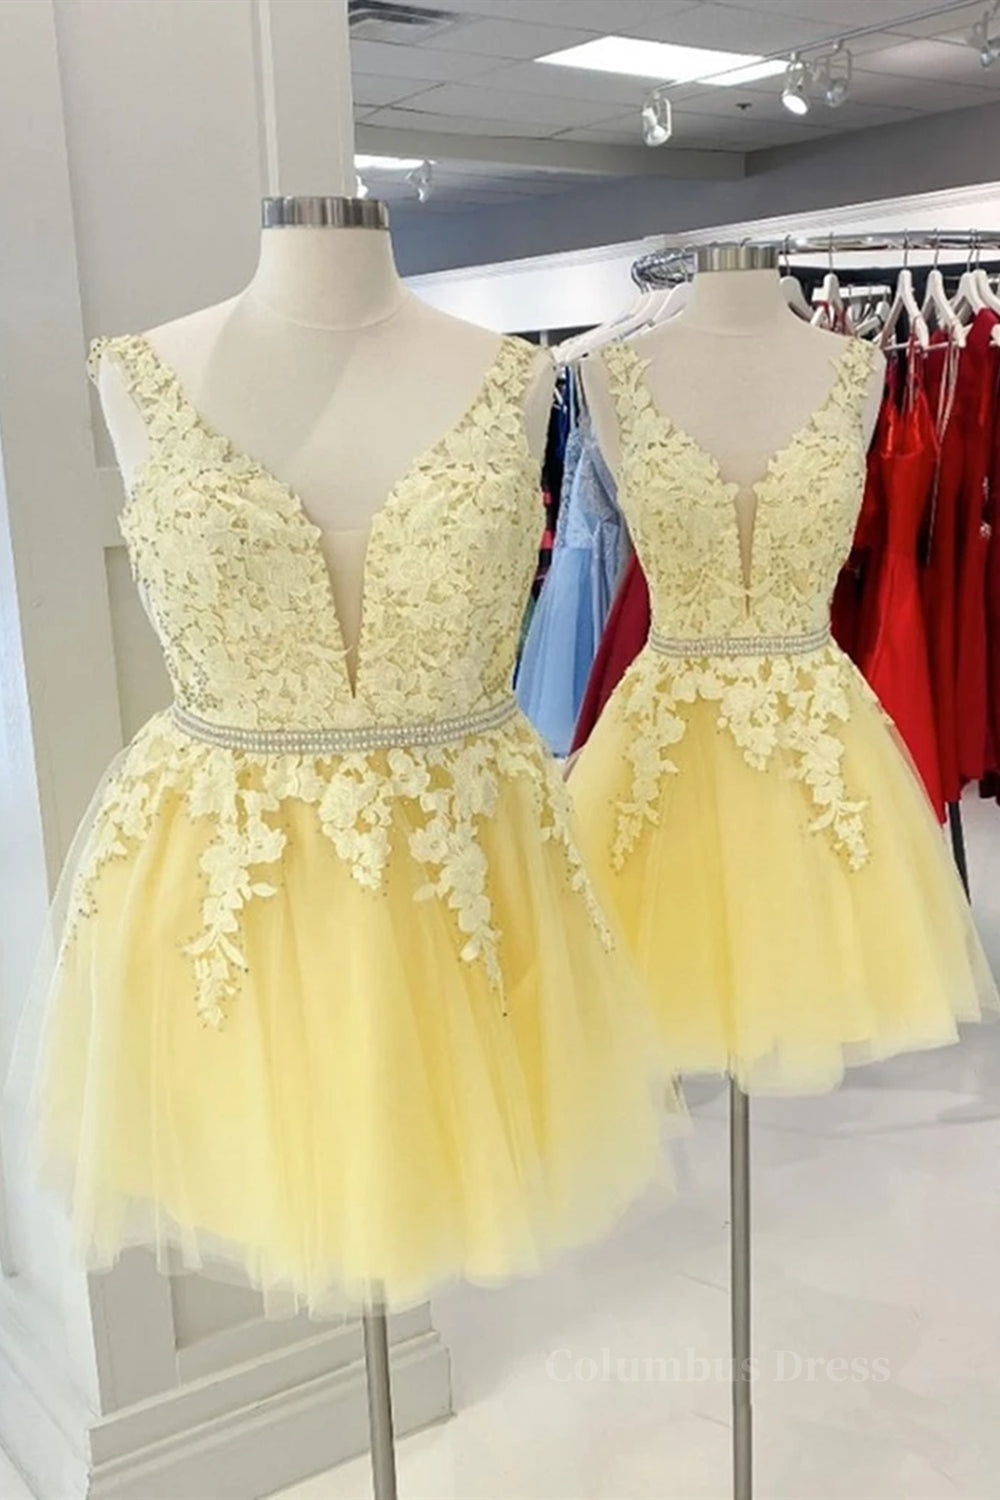 Cute V Neck Yellow Lace Short Corset Prom Dress with Belt, Yellow Lace Corset Homecoming Dress, Short Yellow Corset Formal Evening Dress outfit, Evening Dress Lace